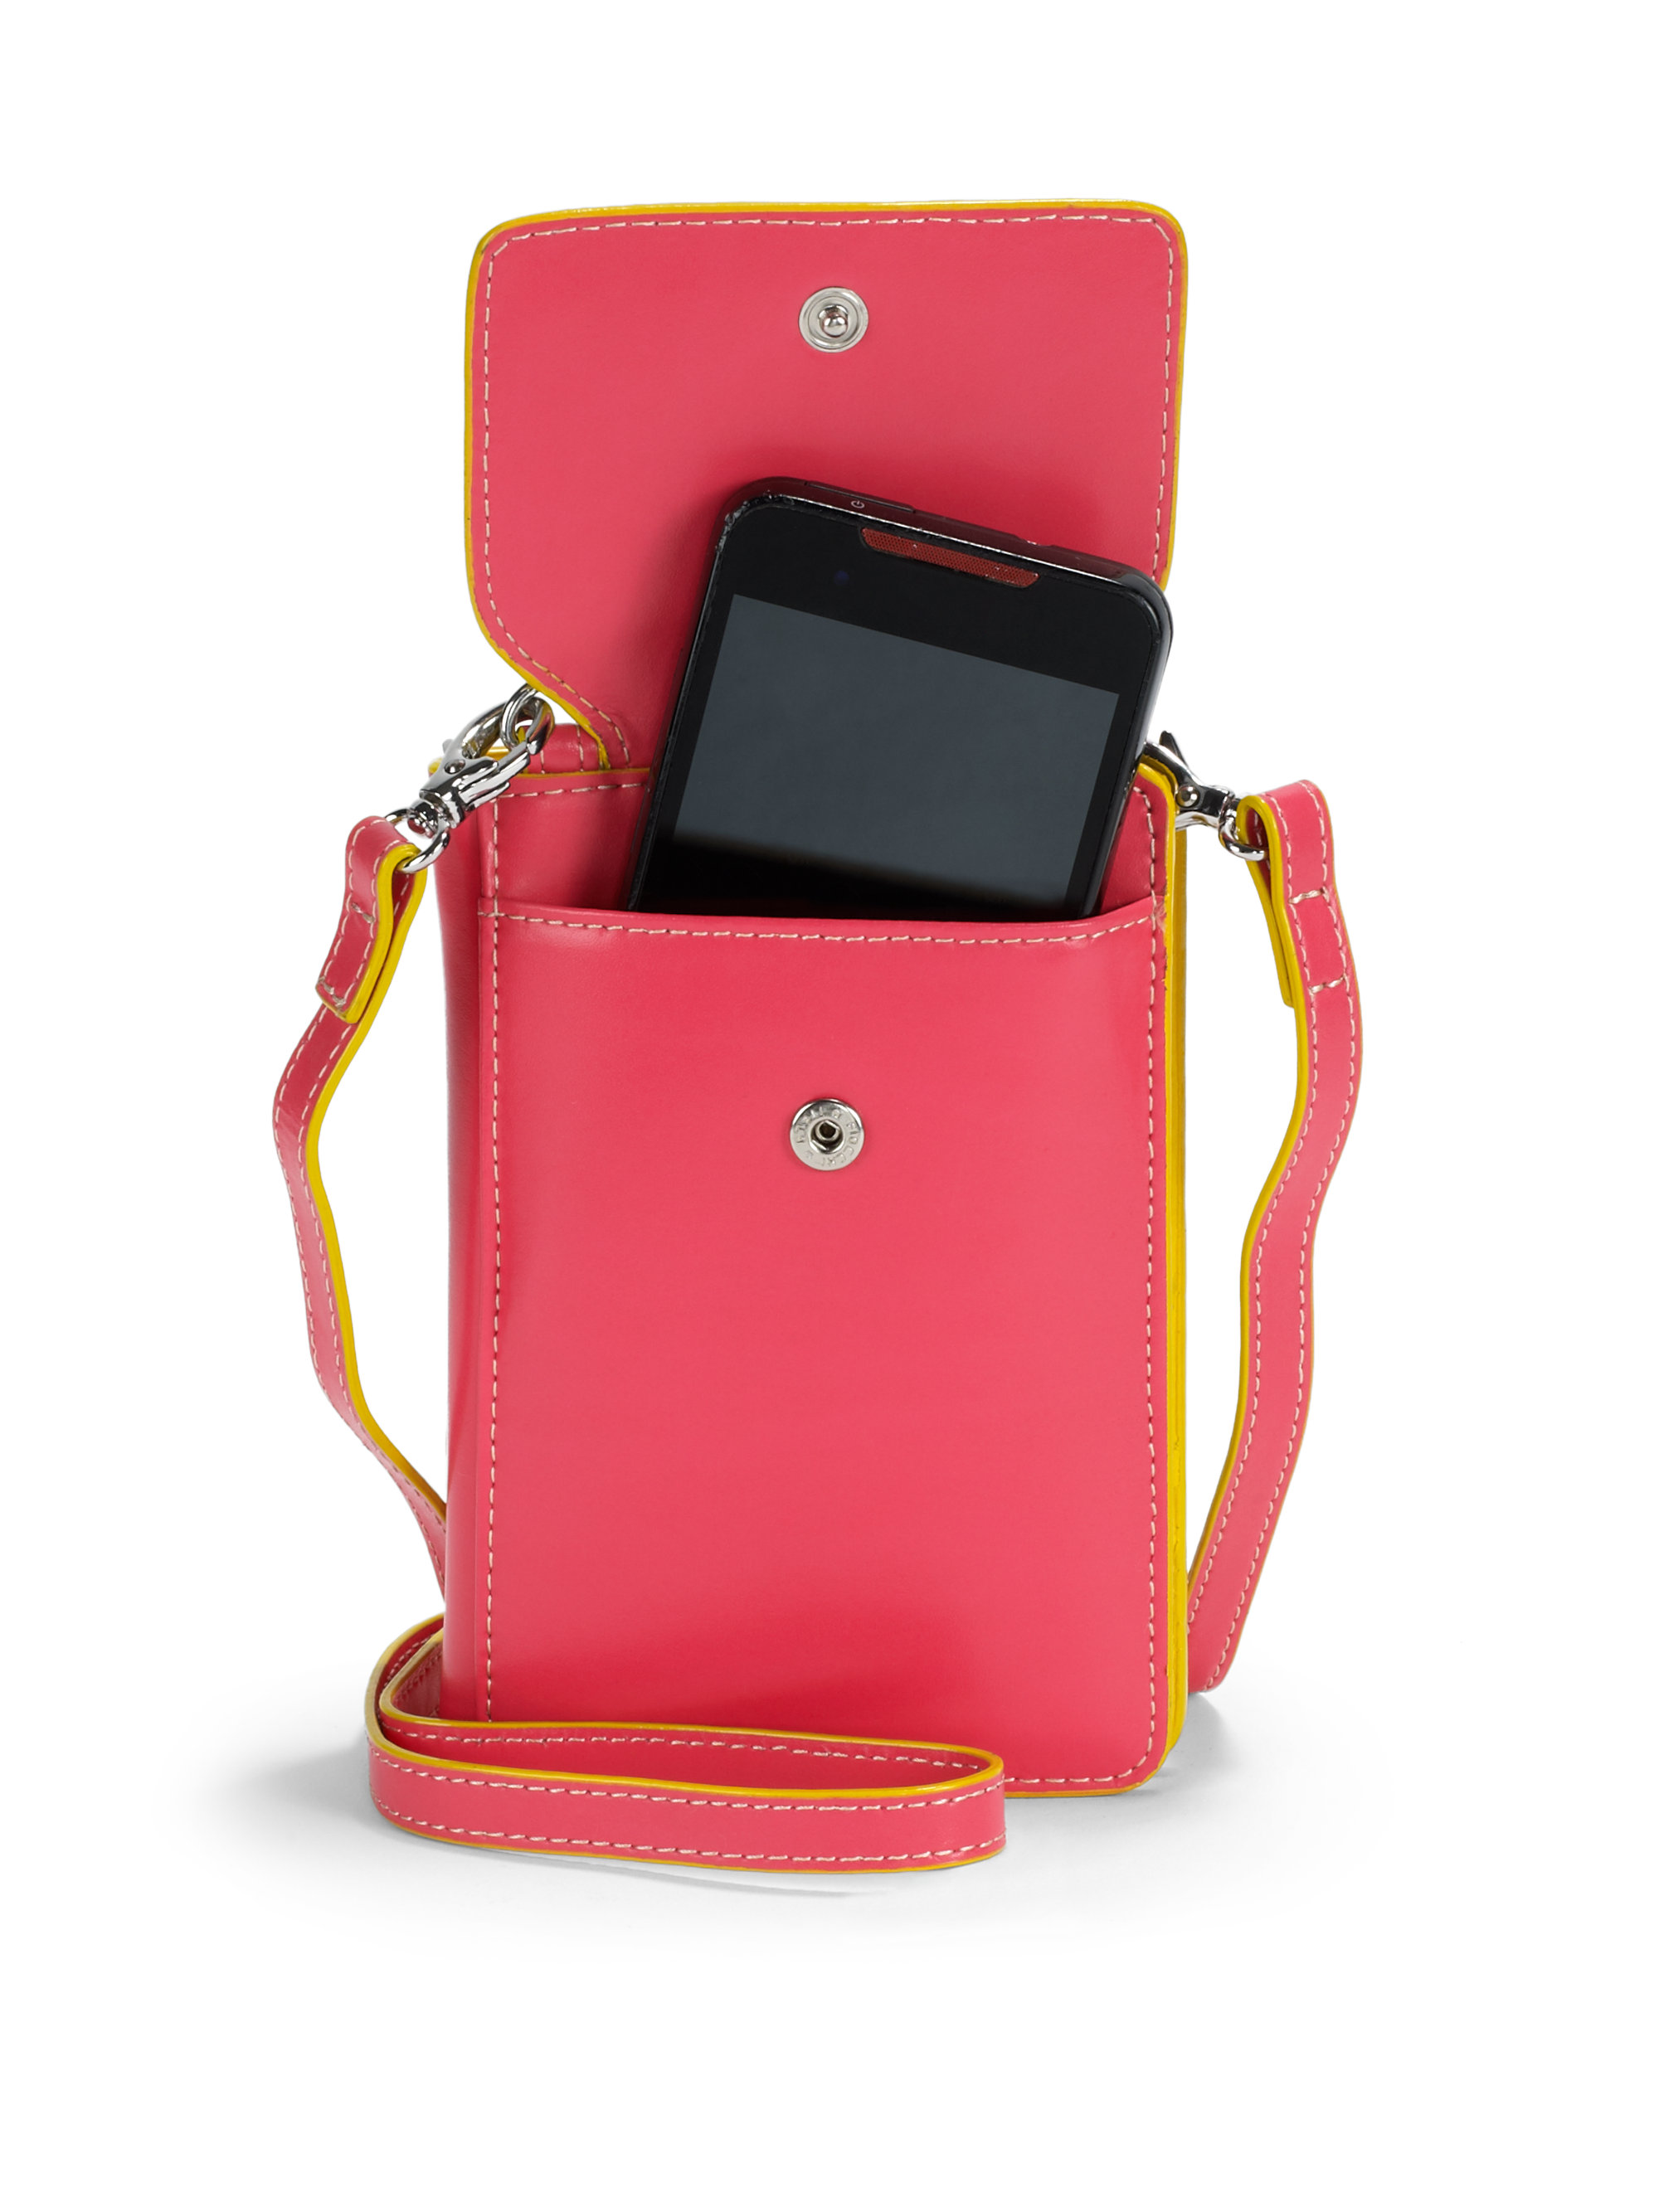 Lyst - Lodis Audrey Olive Phone Crossbody Bag in Pink